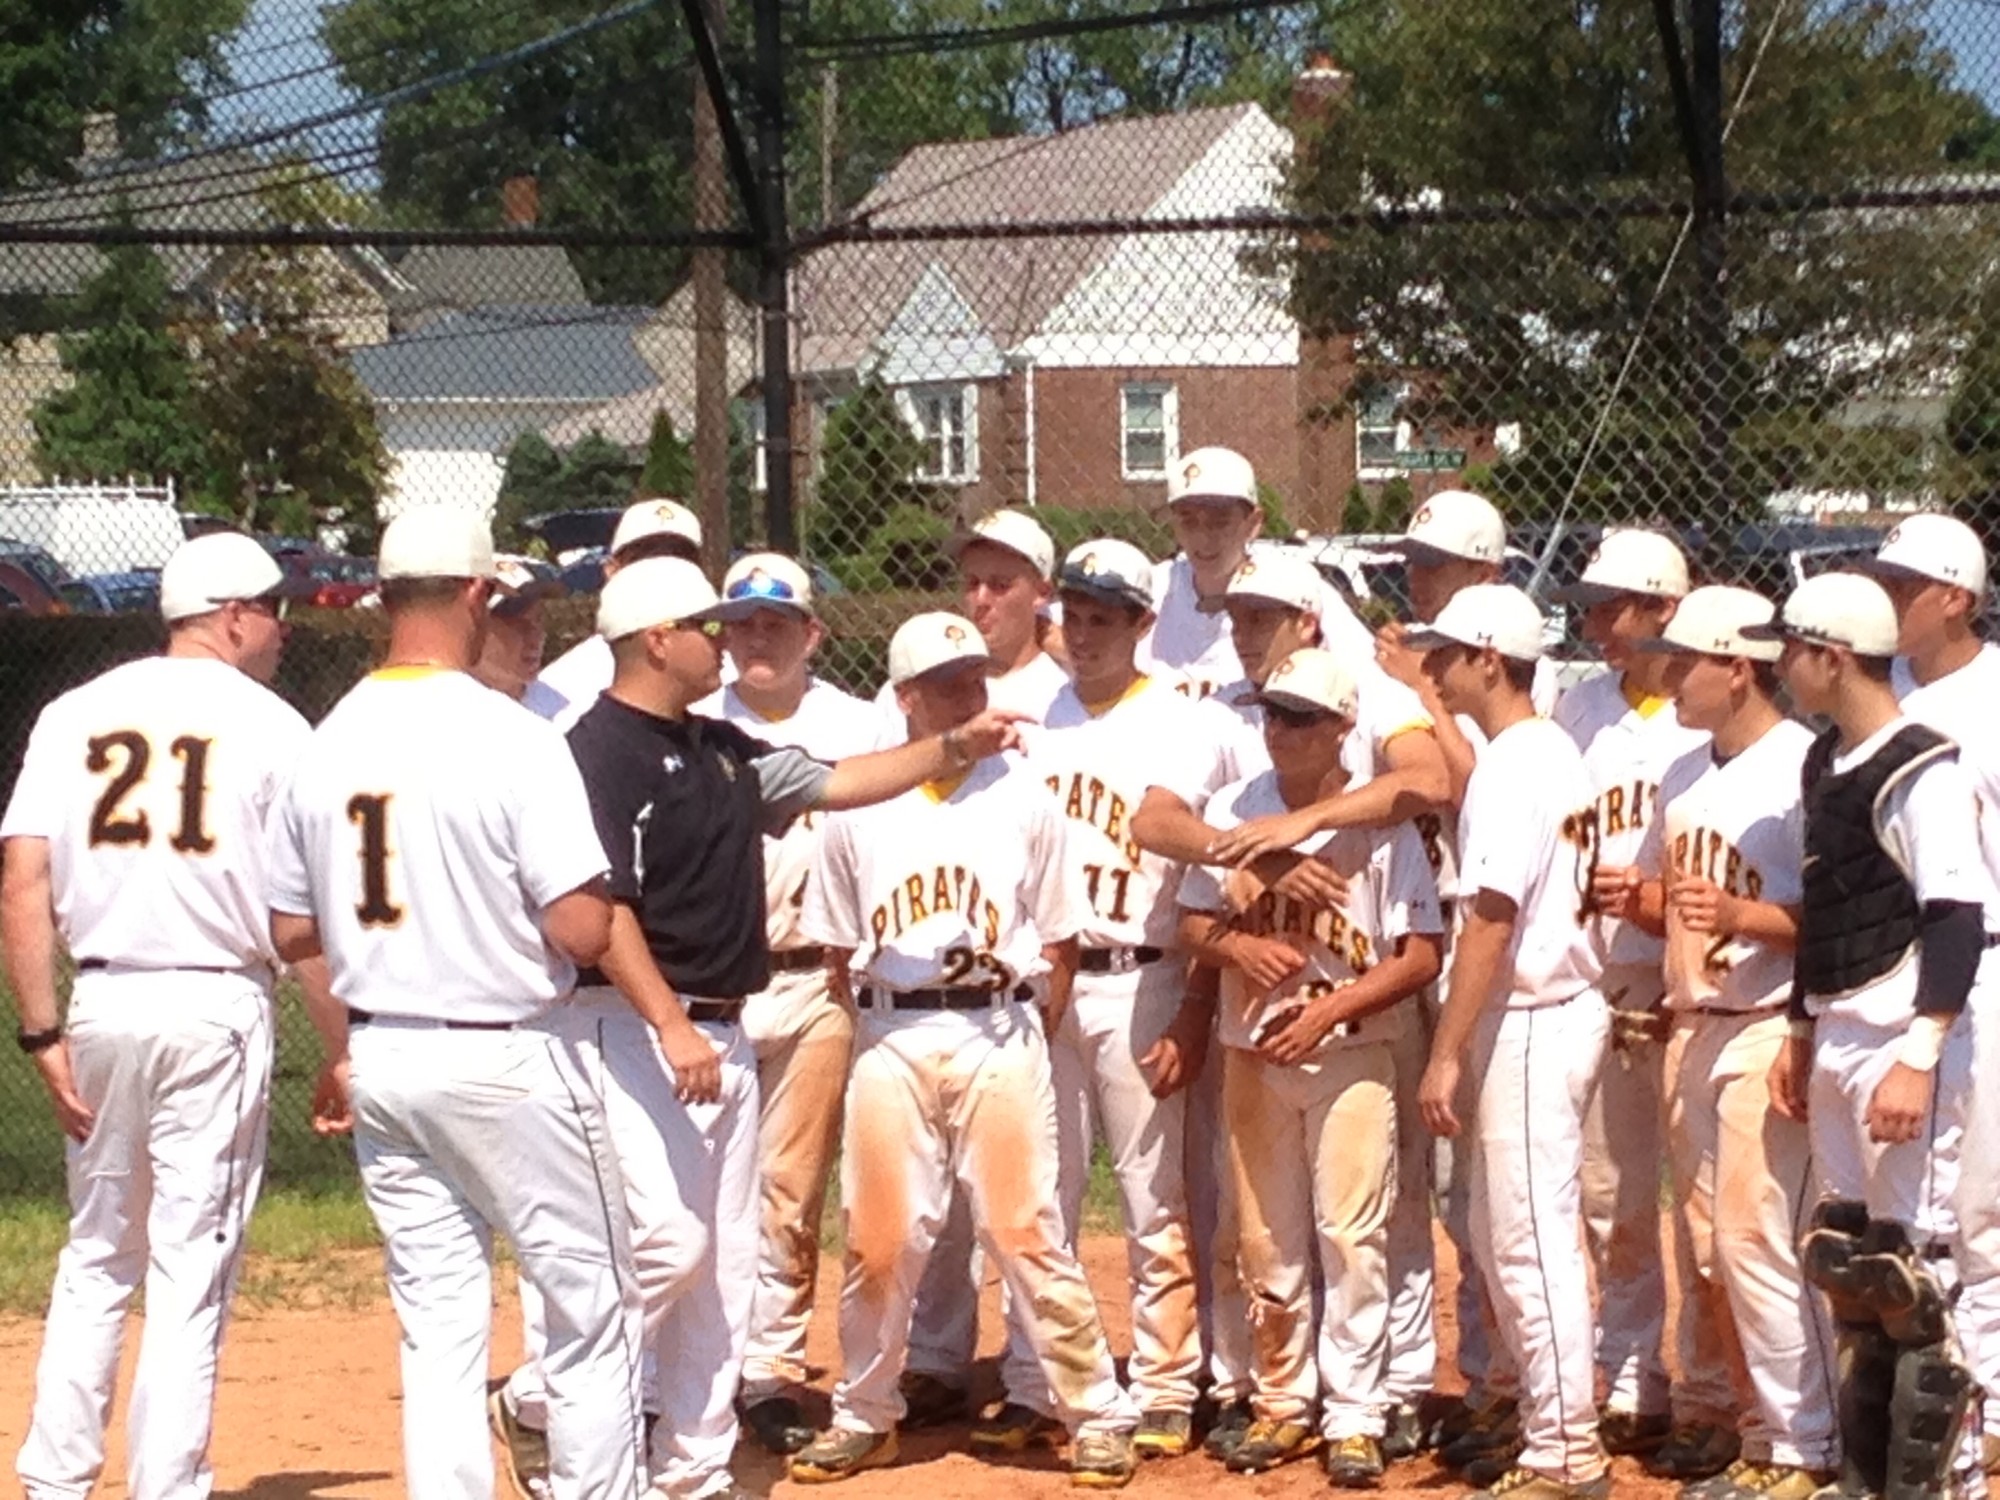 The 16u Long Island Pirates team celebrated its championship win at Firemen’s Field in Valley Stream. The team was coached by Henry Daverin.